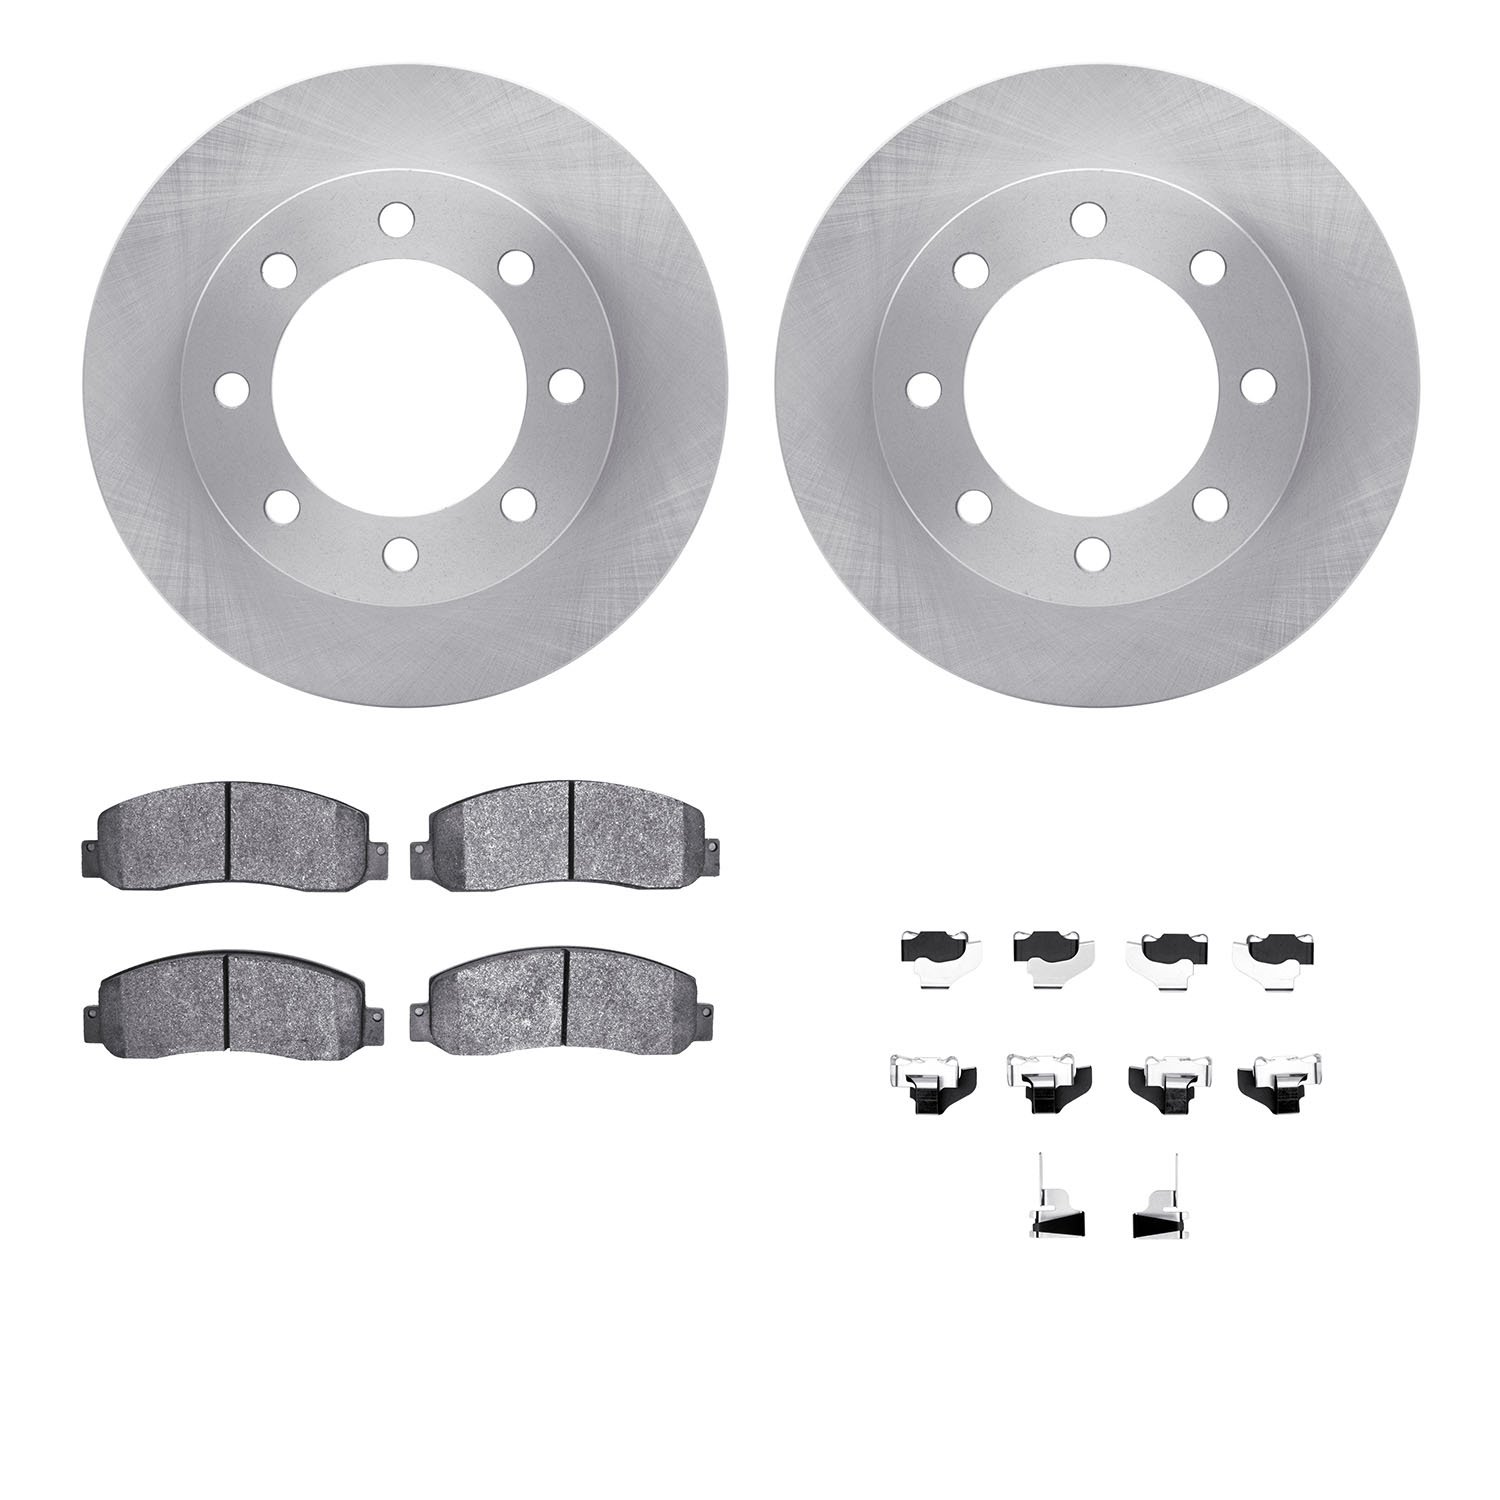 6412-54233 Brake Rotors with Ultimate-Duty Brake Pads Kit & Hardware, 2005-2012 Ford/Lincoln/Mercury/Mazda, Position: Front